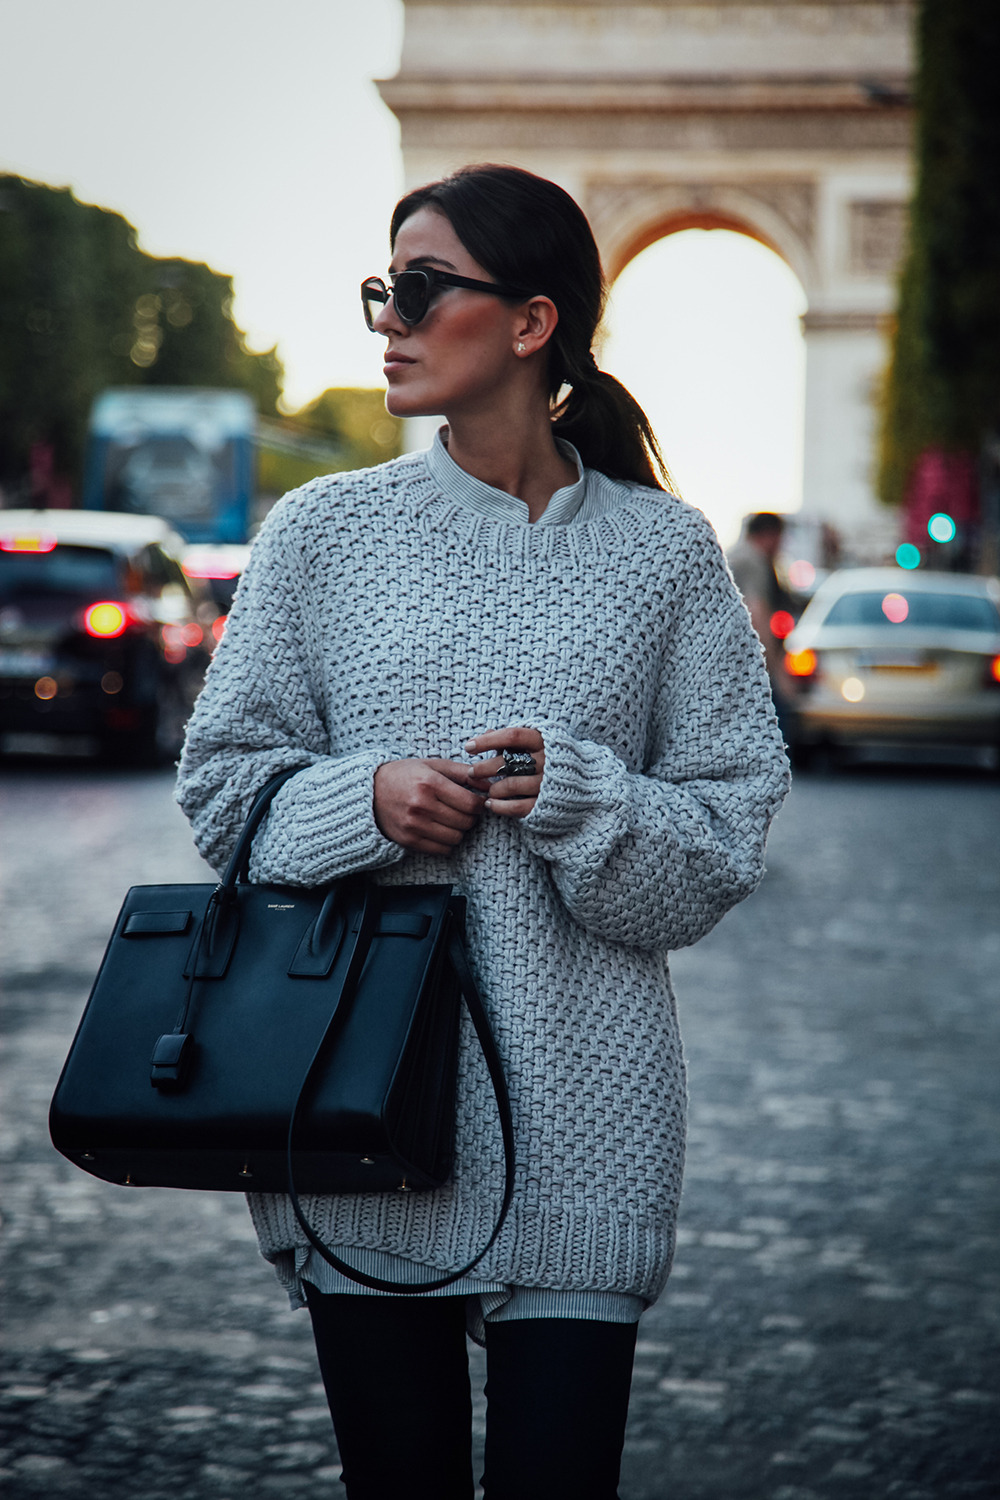 justthedesign:

Sylvia Haghjoo wears a cute oversized knit pullover with a striped shirt and simple black jeans. Sweater: La Roca Village, Jewlery: Georg Jensen, Shades: Dior, Bag: Saint Laurent, Blouse: Tibi.

www.fashionclue.net| Fashion Tumblr, Street Wear &amp; Outfits